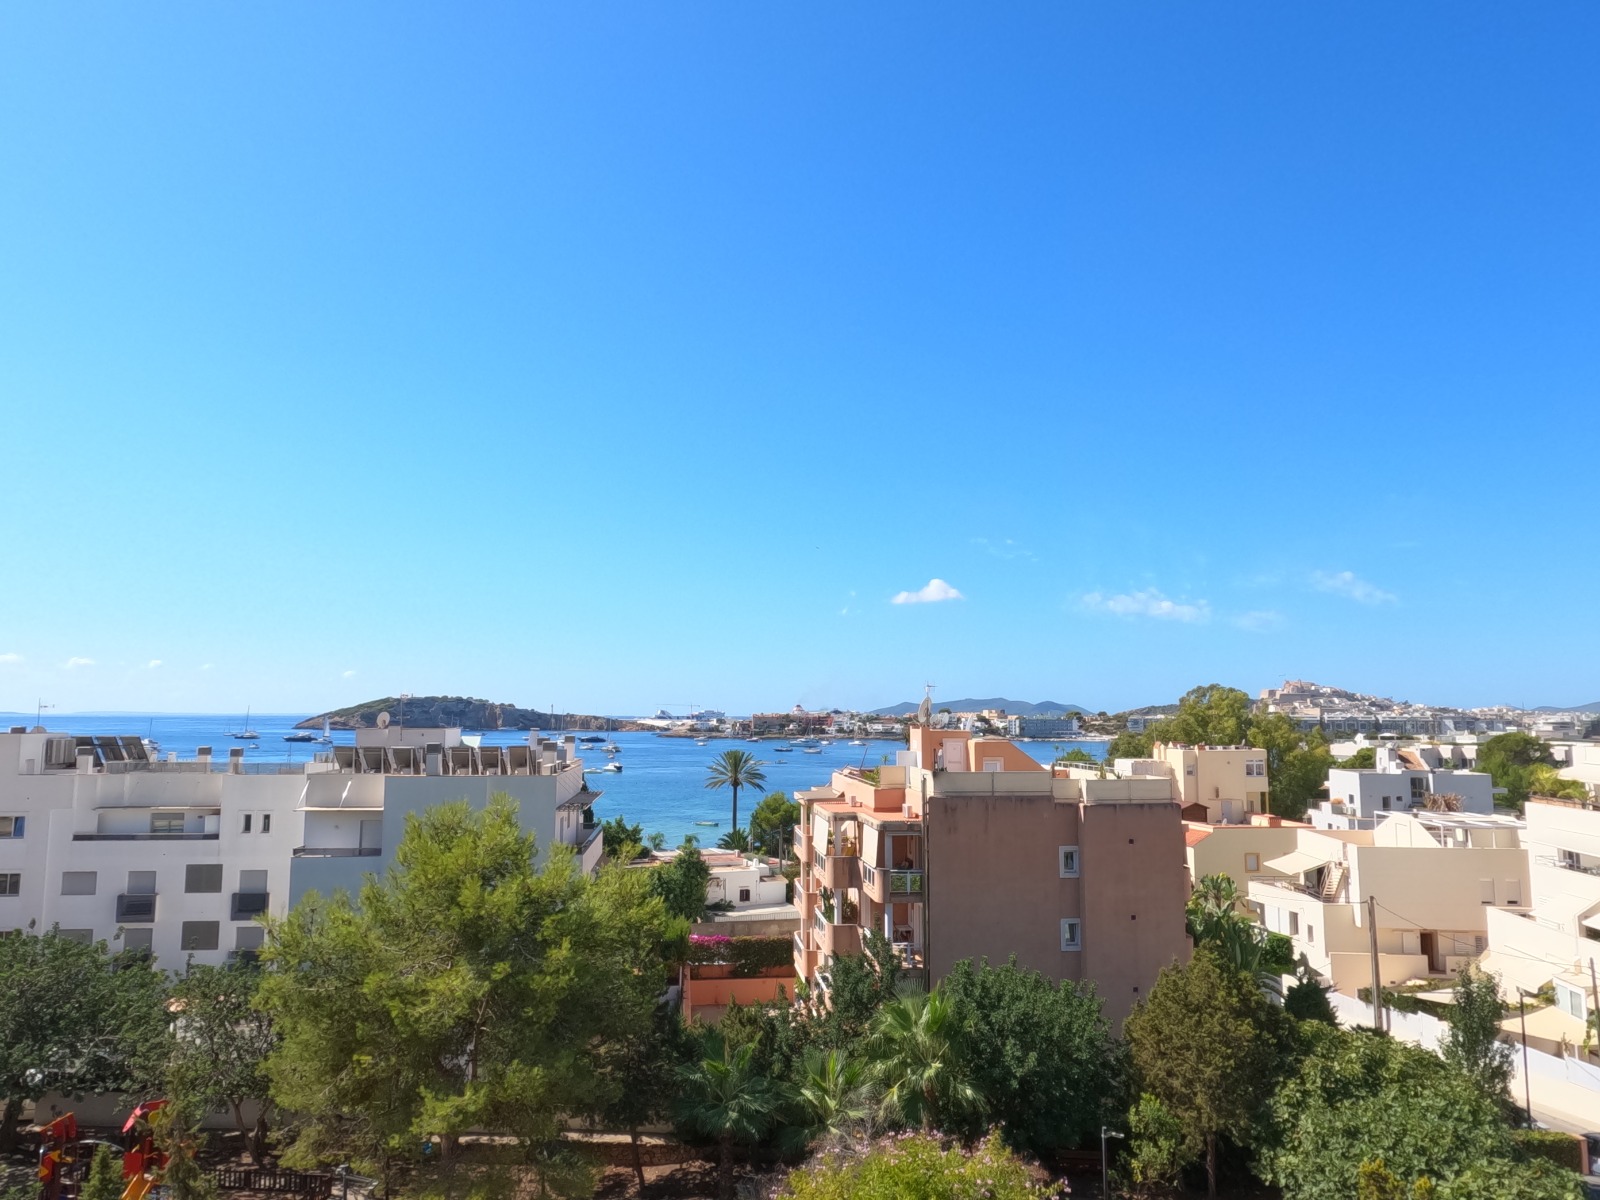 Very bright and cozy apartment with stunning sea view and only 3 minutes walk from the beach of Talamanca